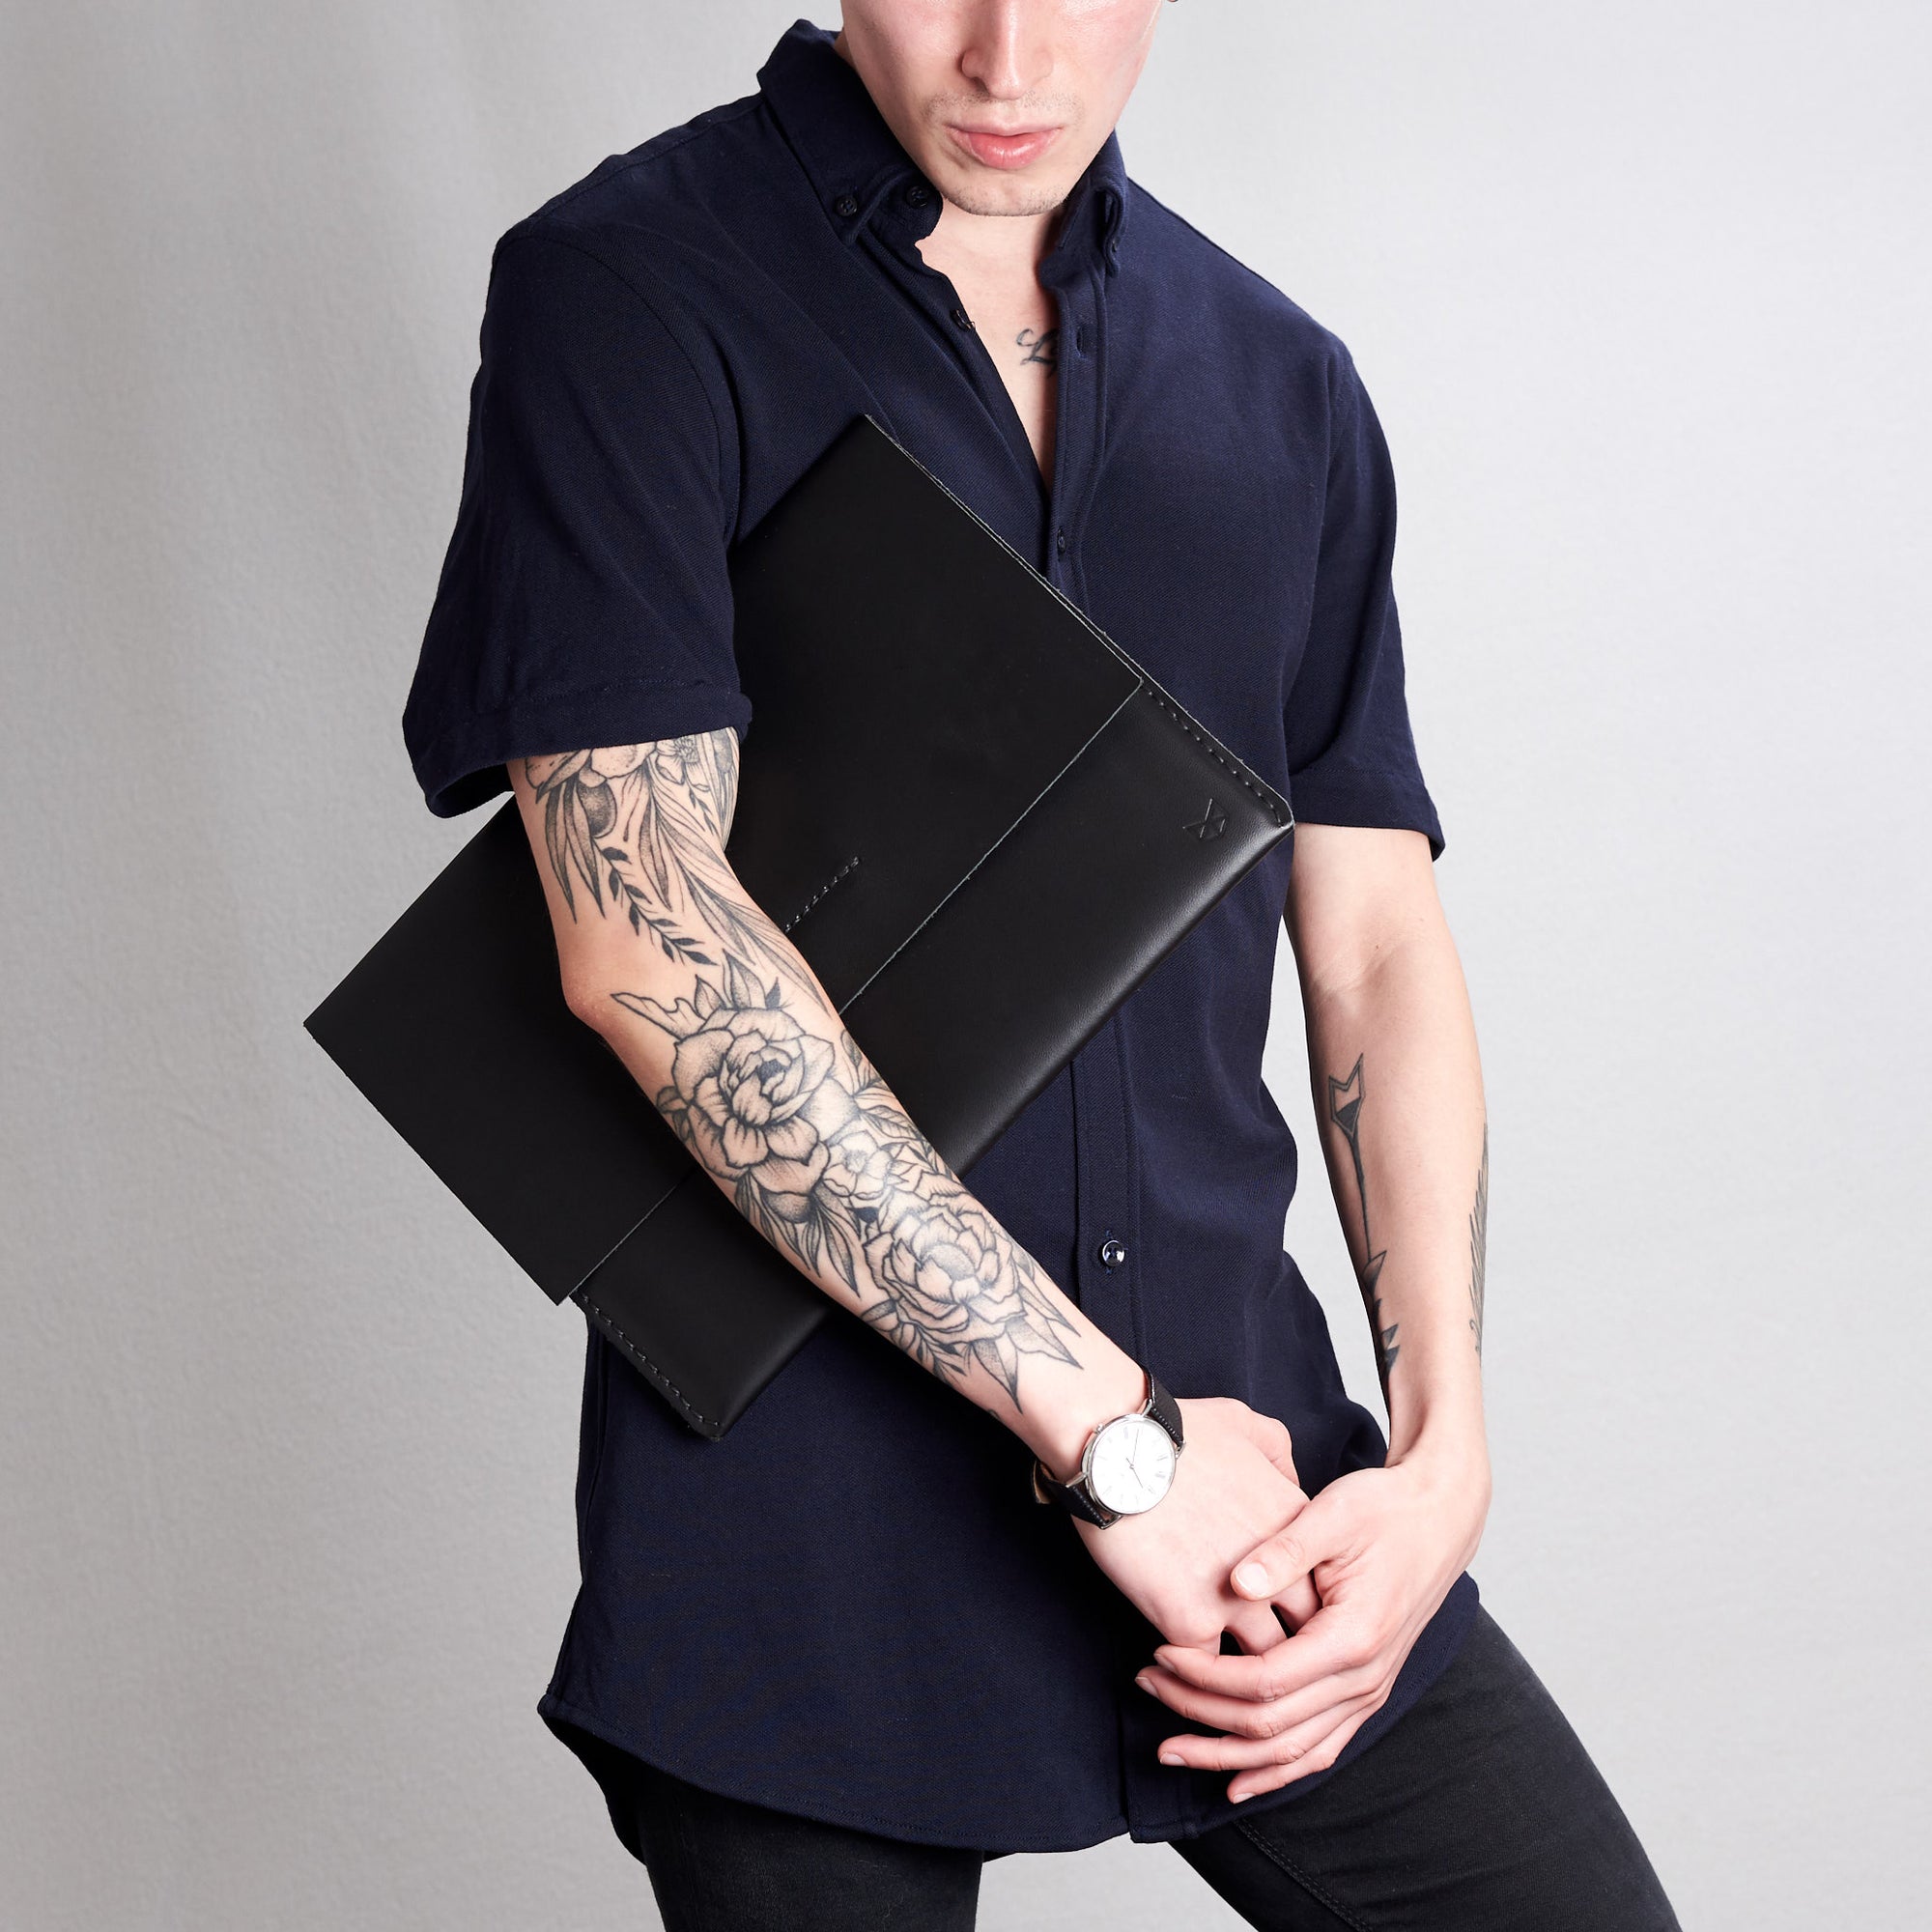 Style holding case by model. Black draftsman 1 case by Capra Leather. Google pixel book sleeve.